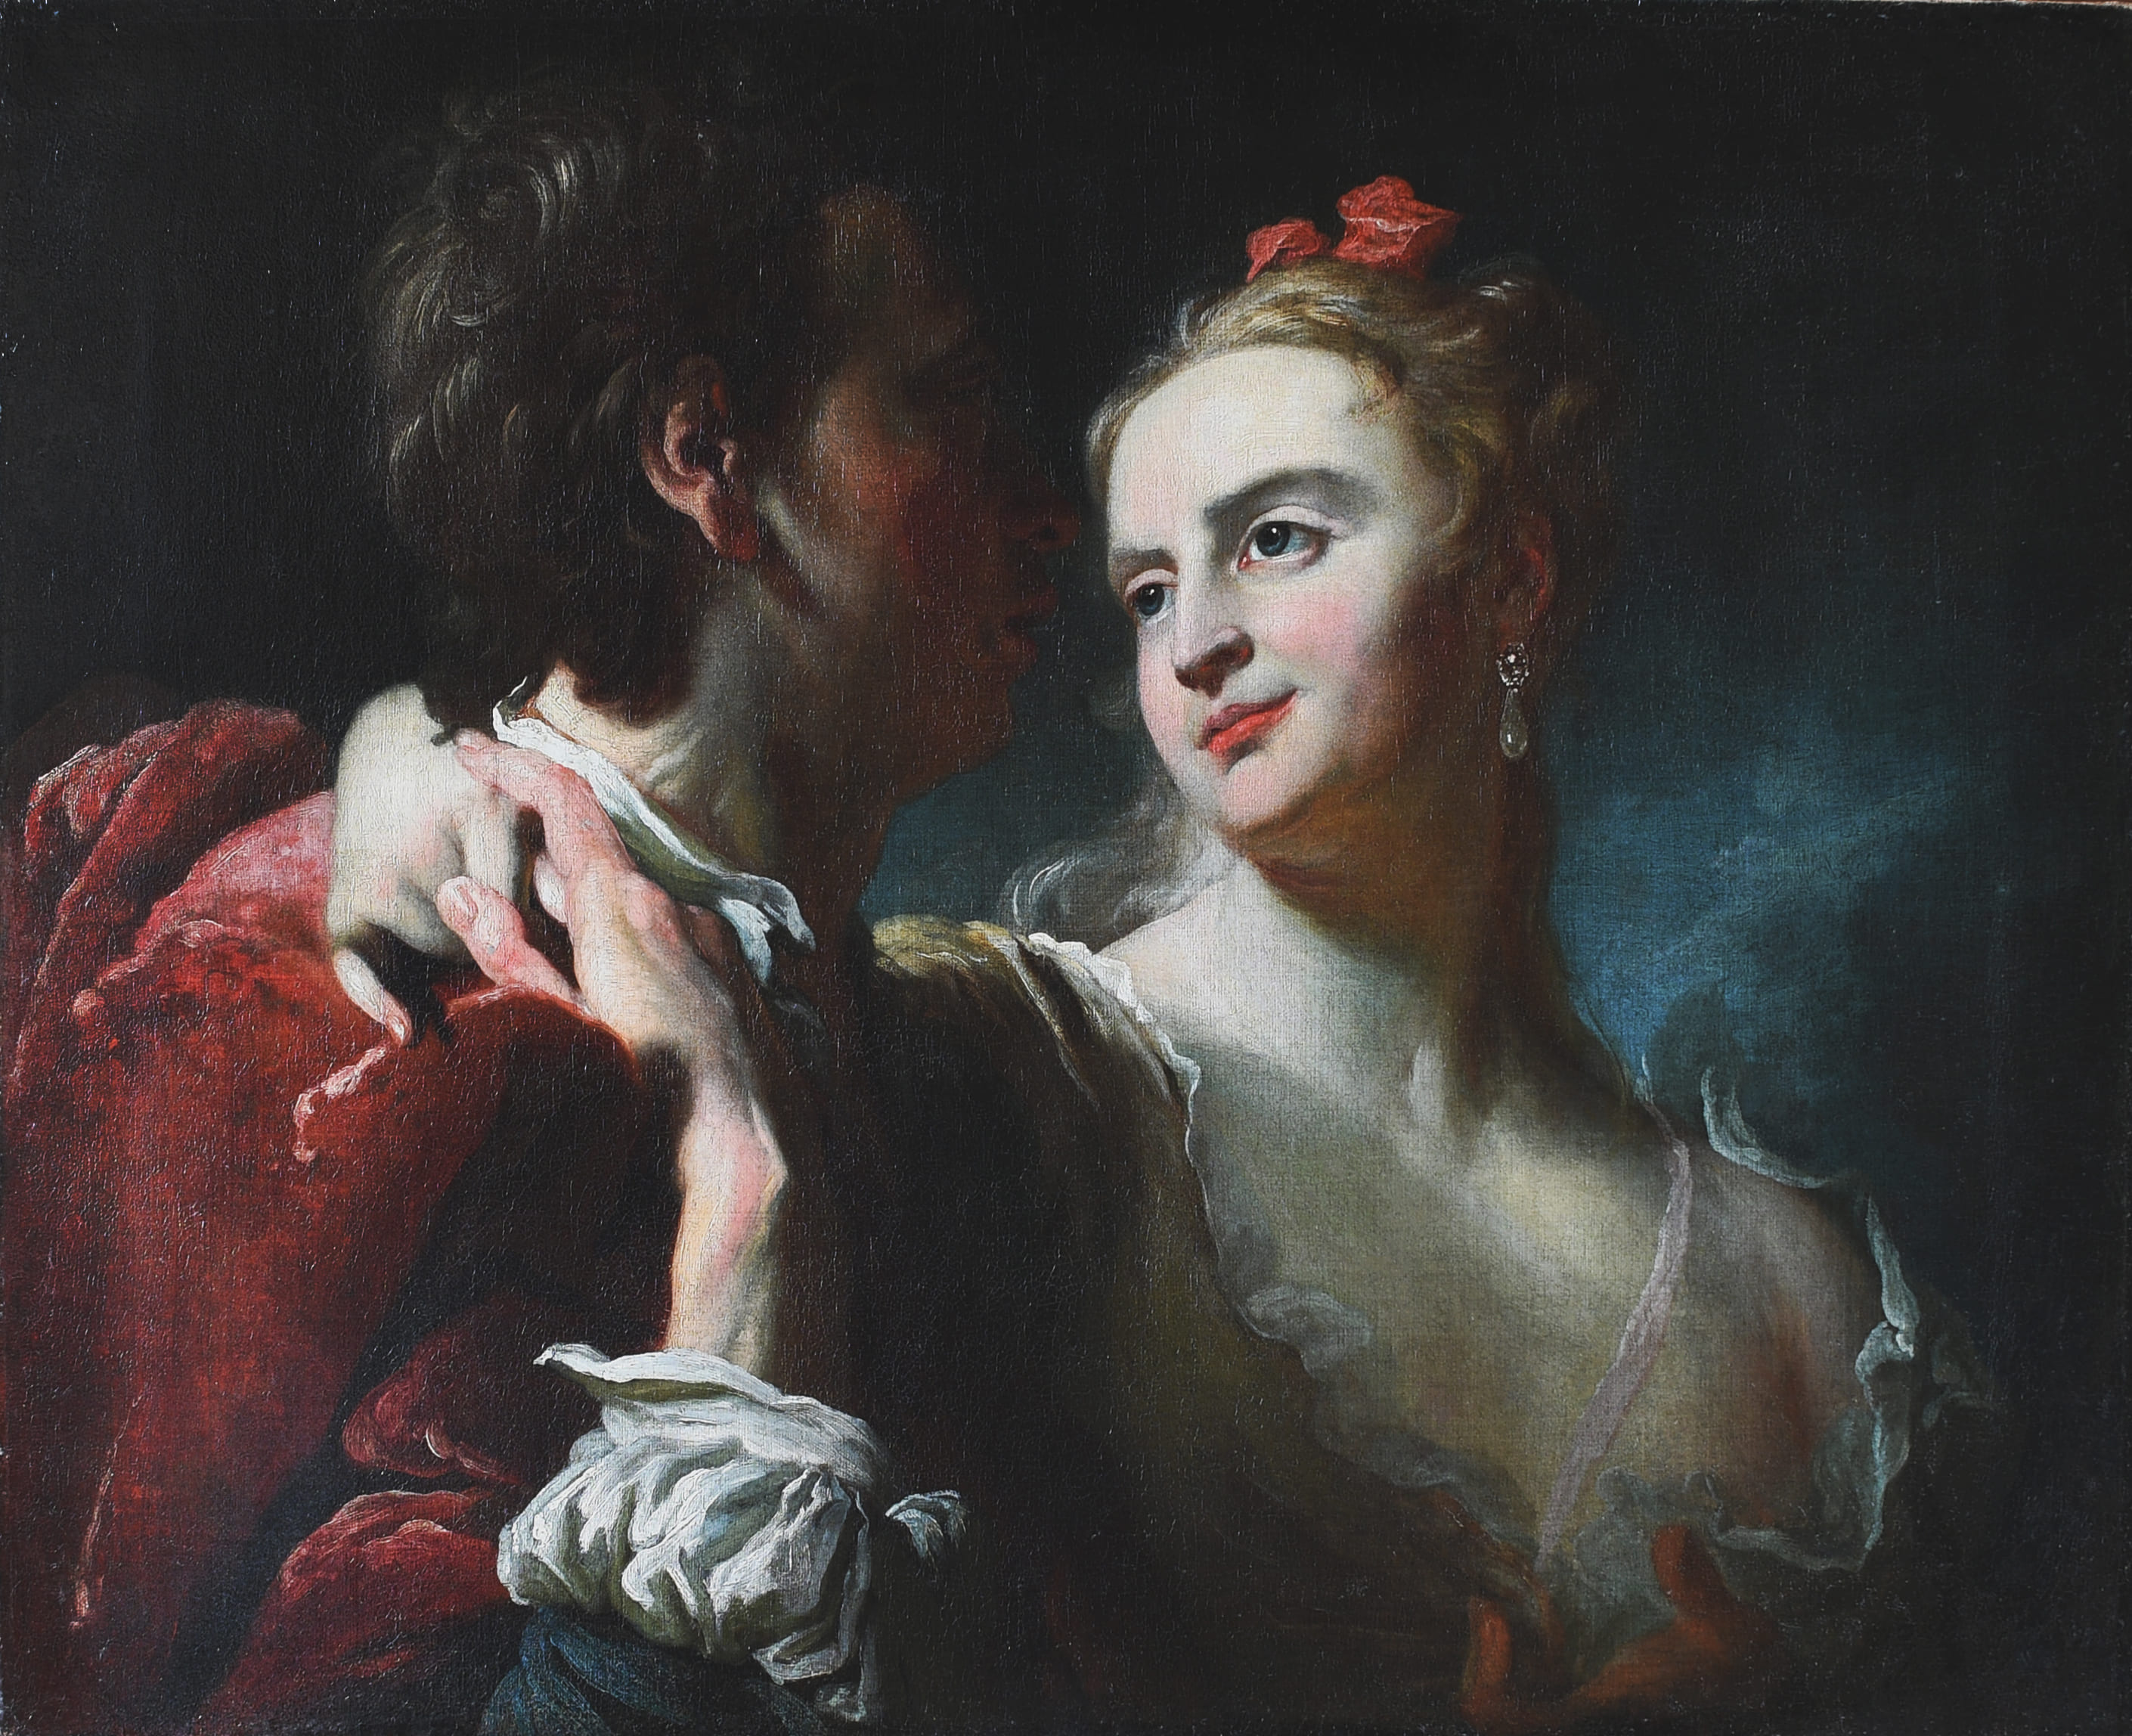 Oil on canvas. The painting depicts a young man and a woman. Woman's hand is on the young man's shoulder, he holds his companion's hand.